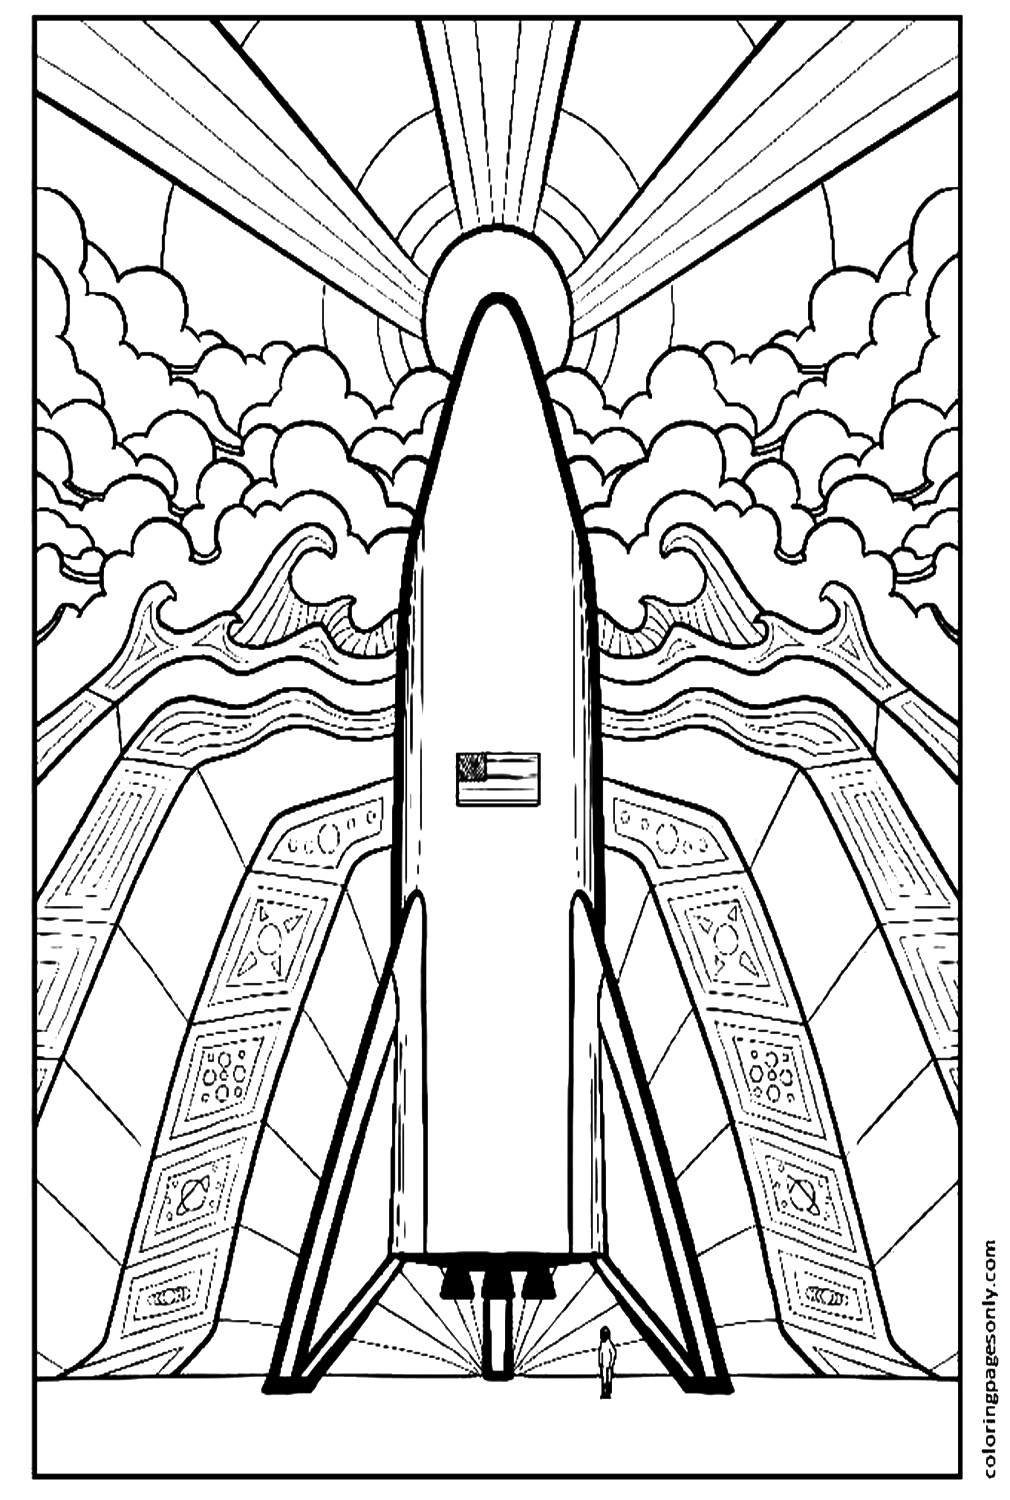 Inspiration of Elon Musk Coloring Pages Coloring Page